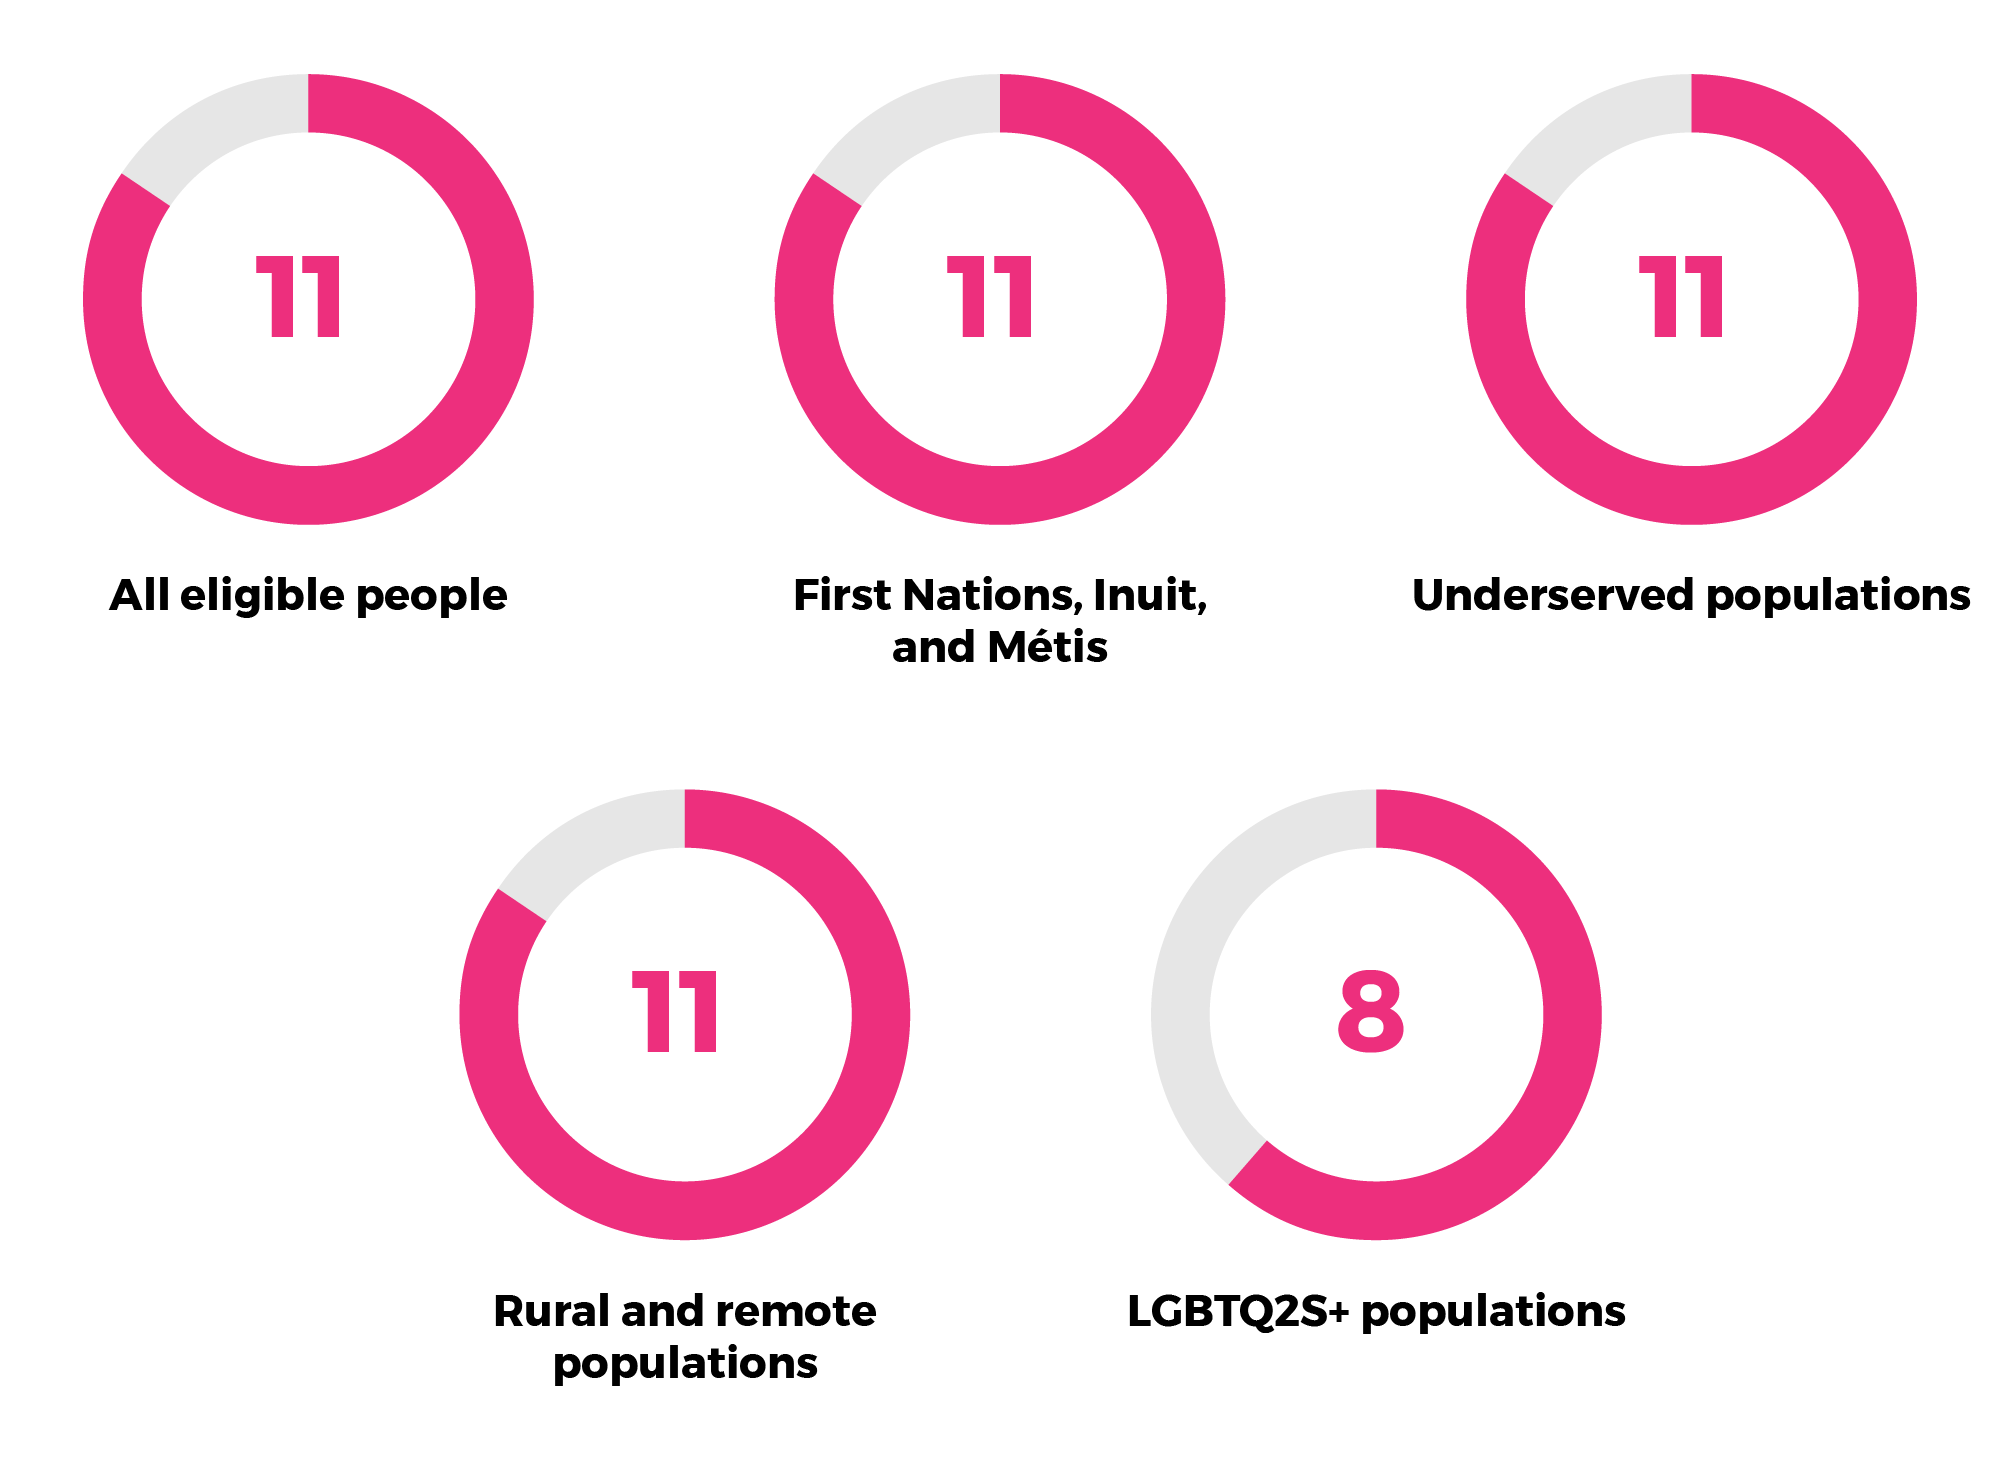 The number of provinces and territories who are using strategies to increase and improve screening in different populations are 11 for all eligible people; 11 for First Nations, Inuit, and Métis; 11 for underserved populations; 11 for rural and remote populations; 8 for LGBTQ2S+ populations. 